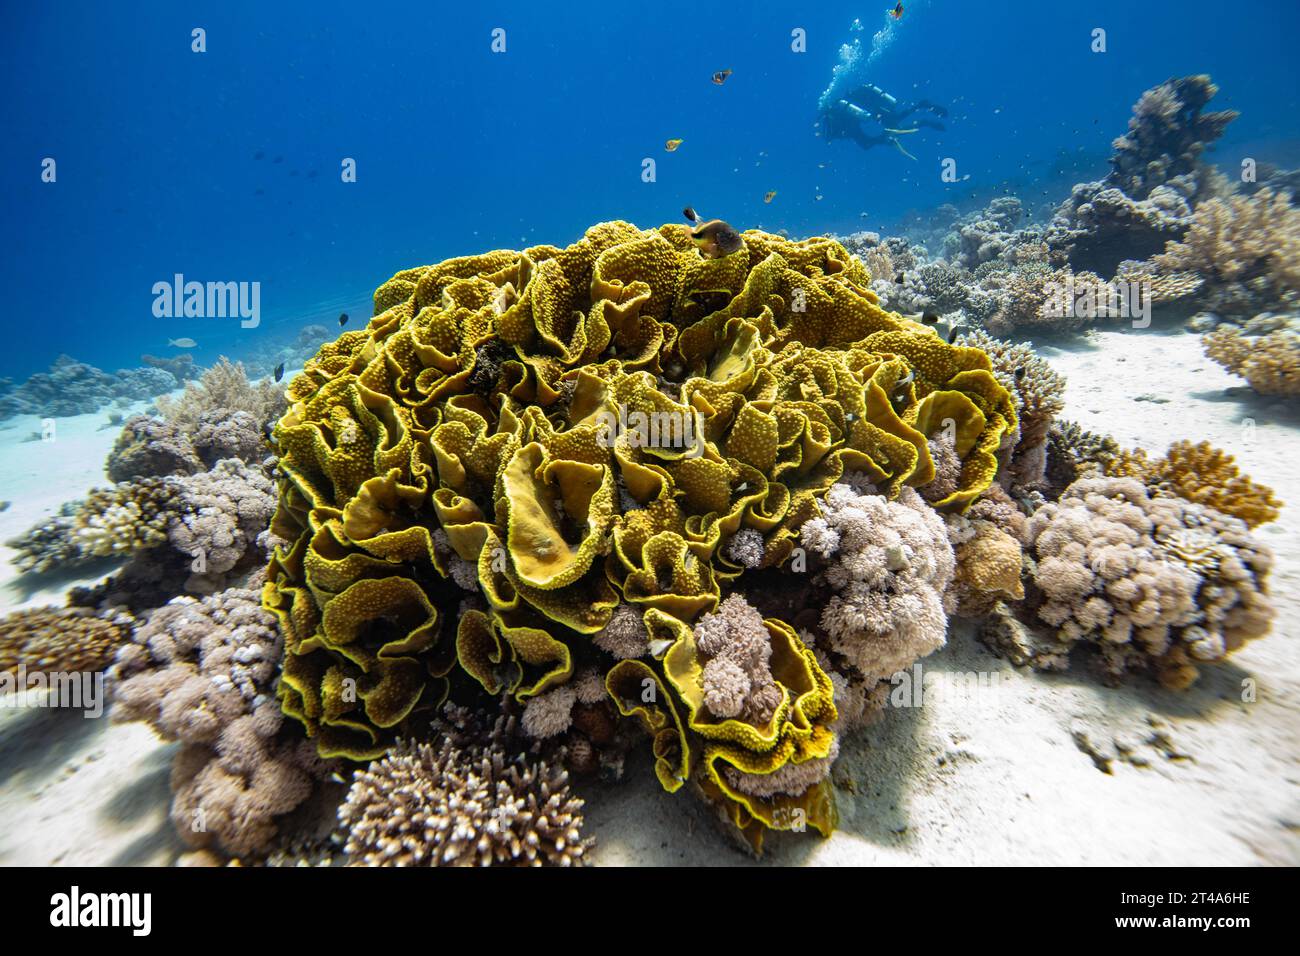 Large yellow lettuce coral, Turbinaria mesenterina, with scuba divers swimming across the reef in background Stock Photo